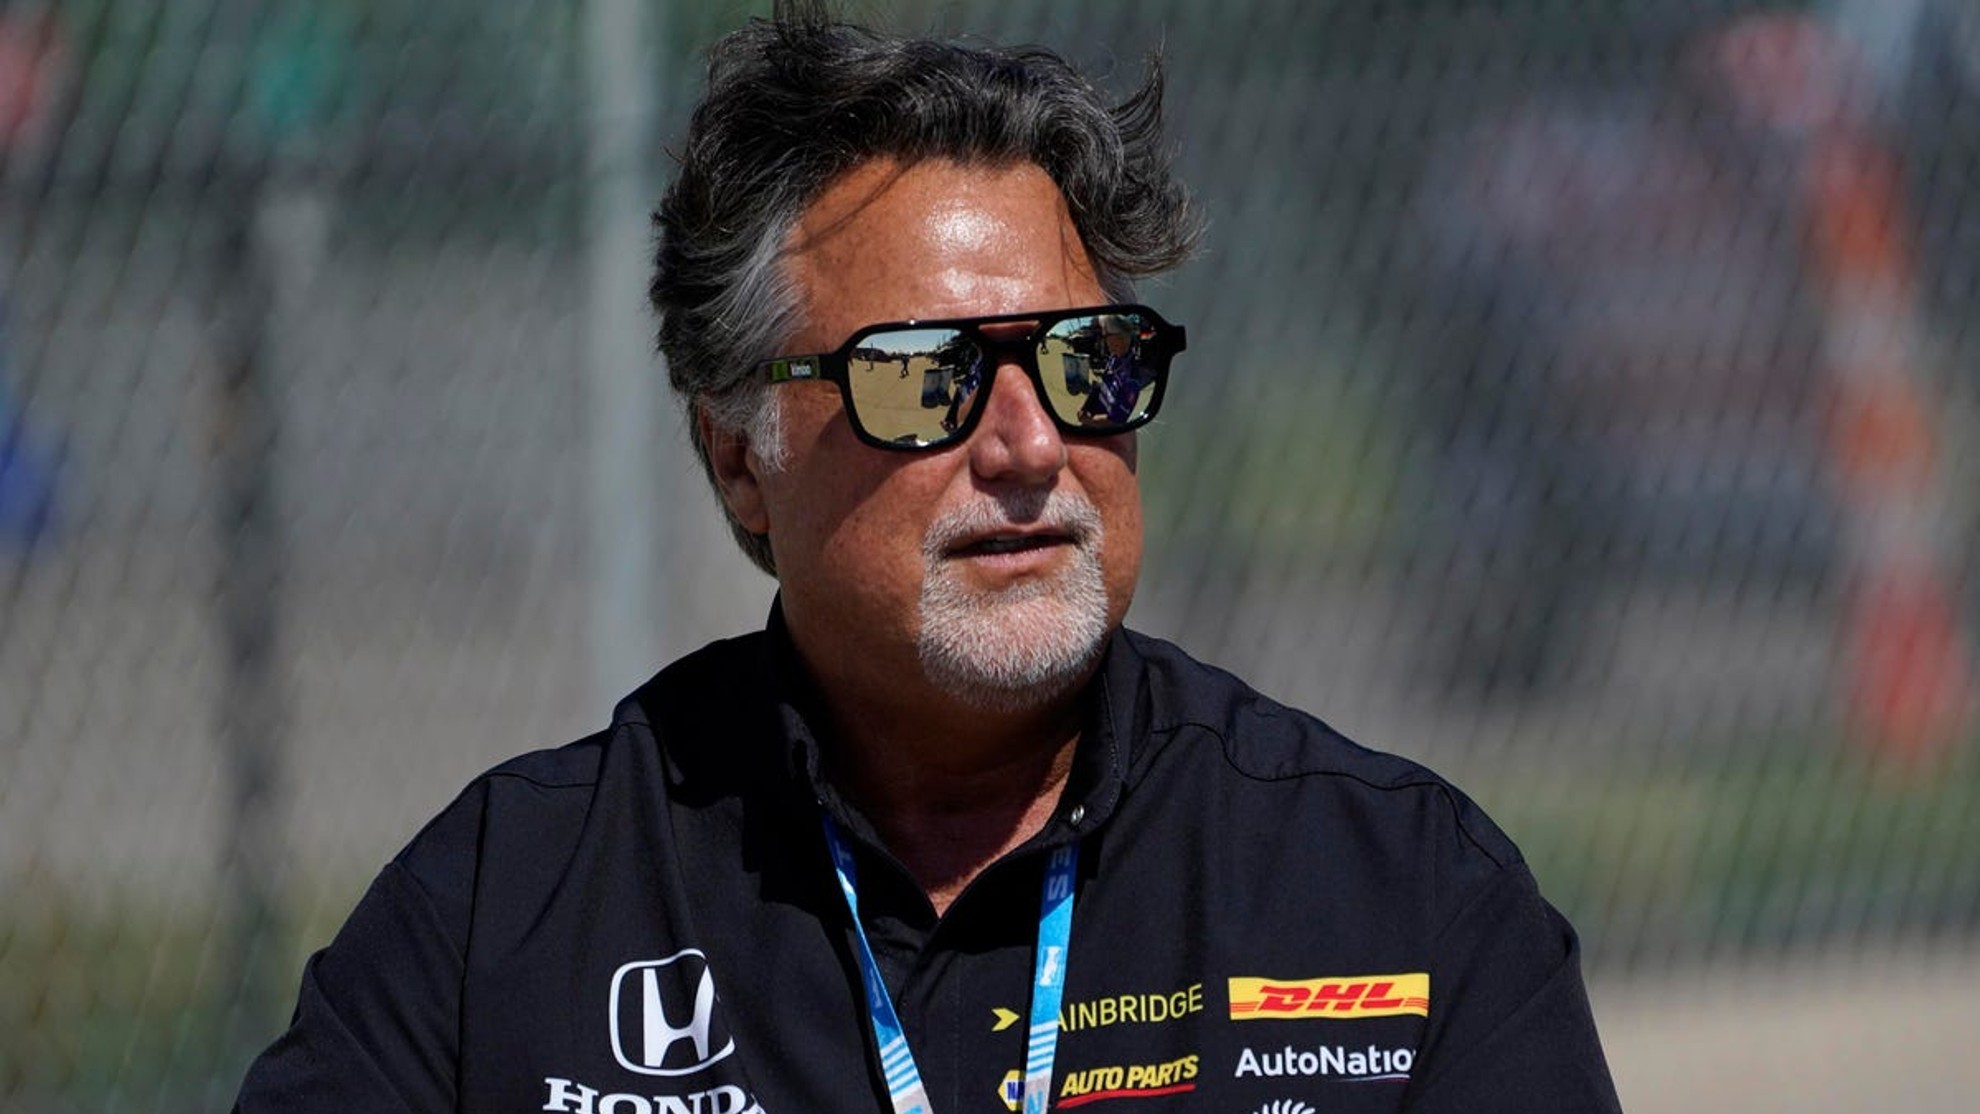 More Than 200 Million USD Andretti Needs to Invest, if He Wants to Enter F1